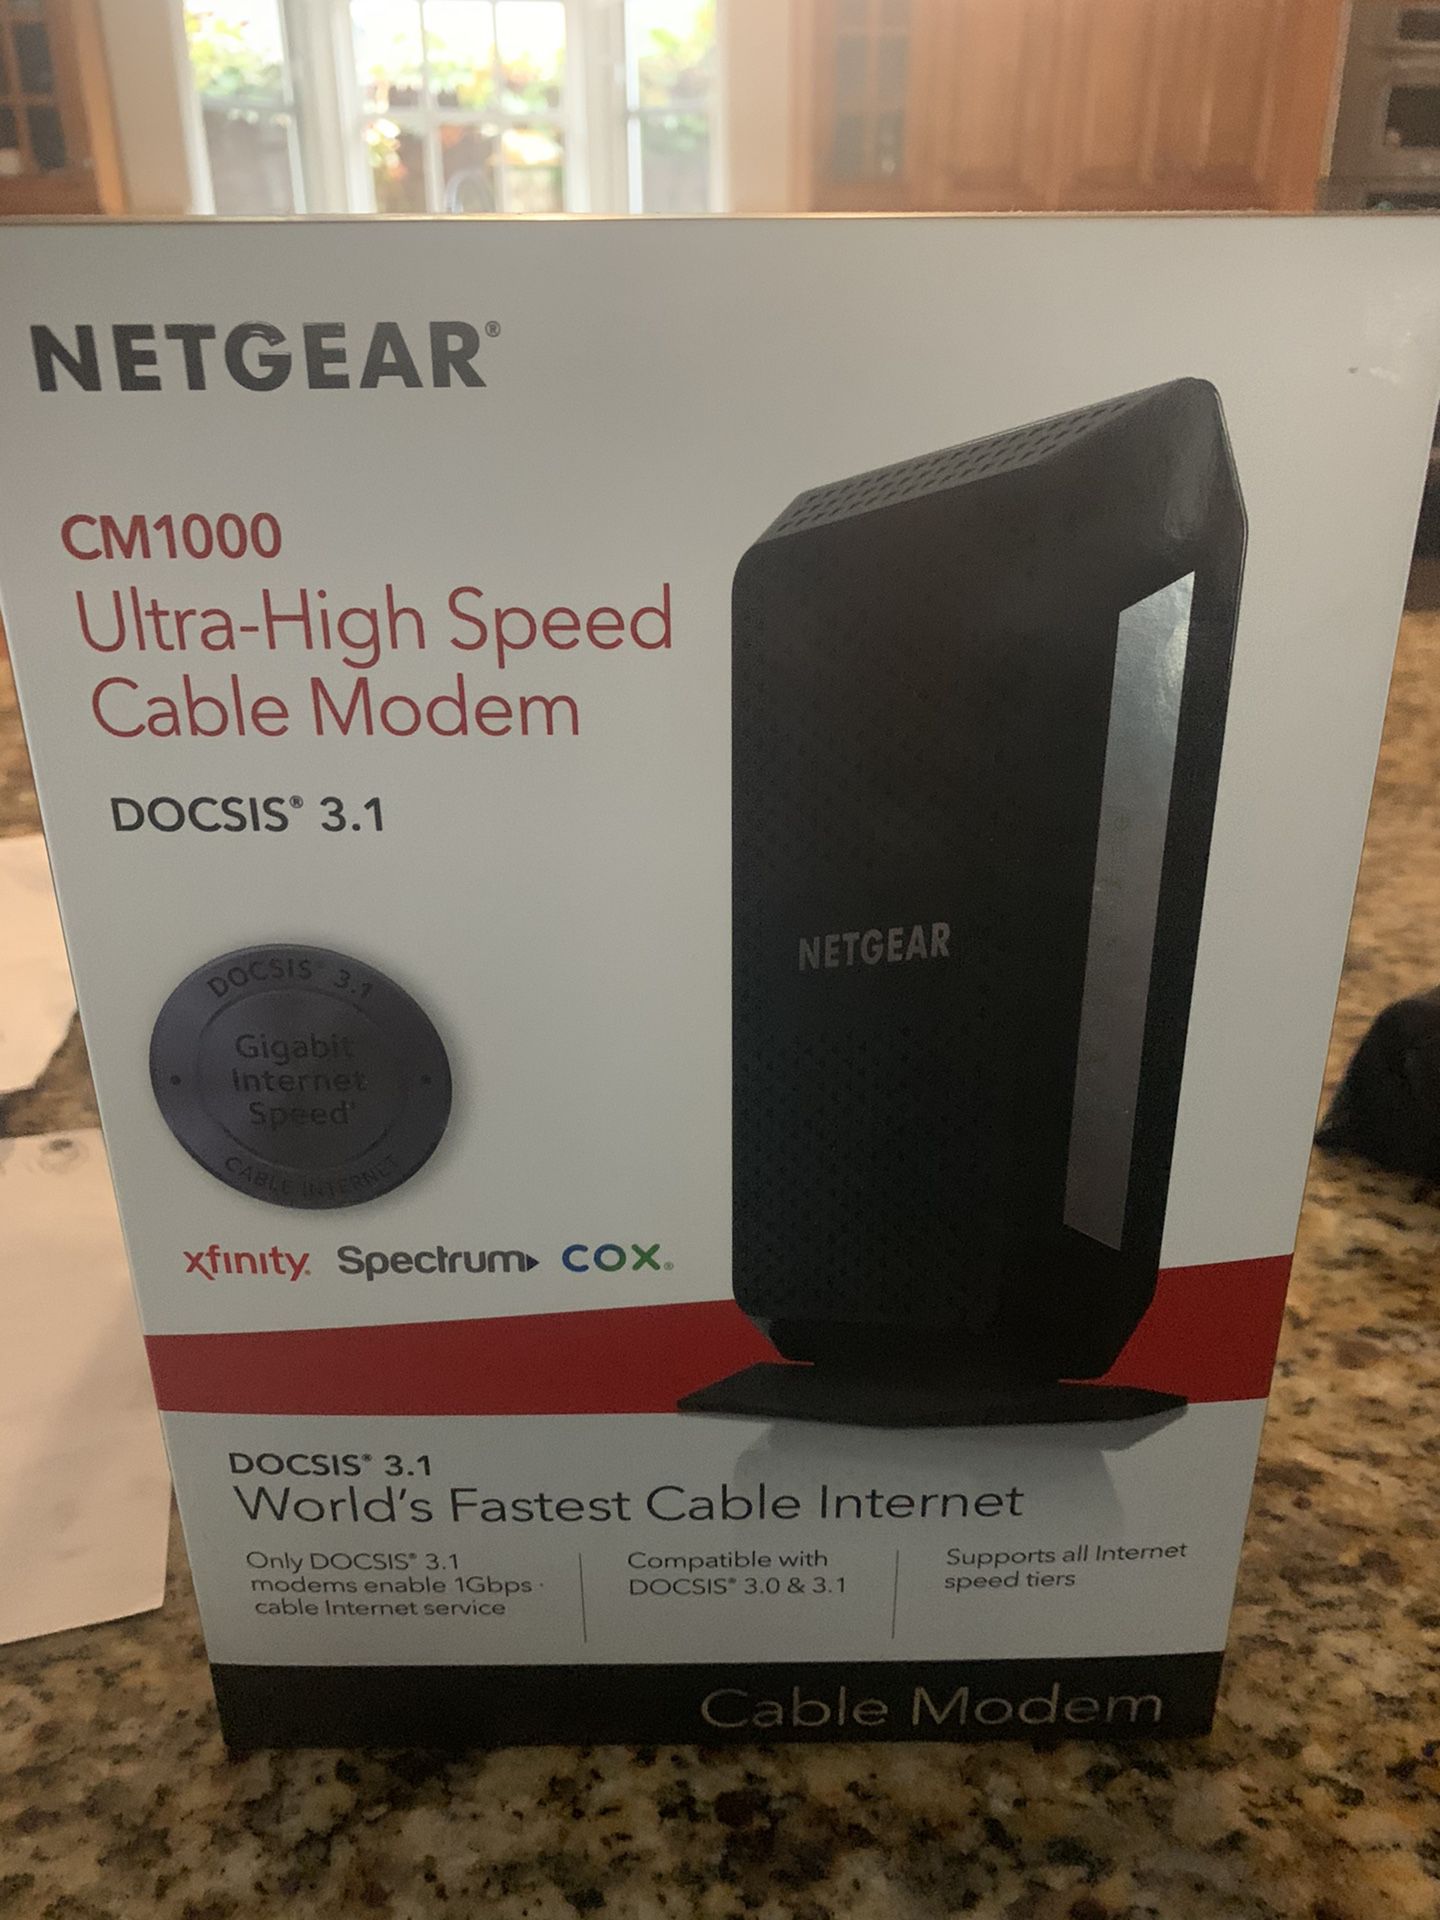 Brand new modem! Bought by mistake.